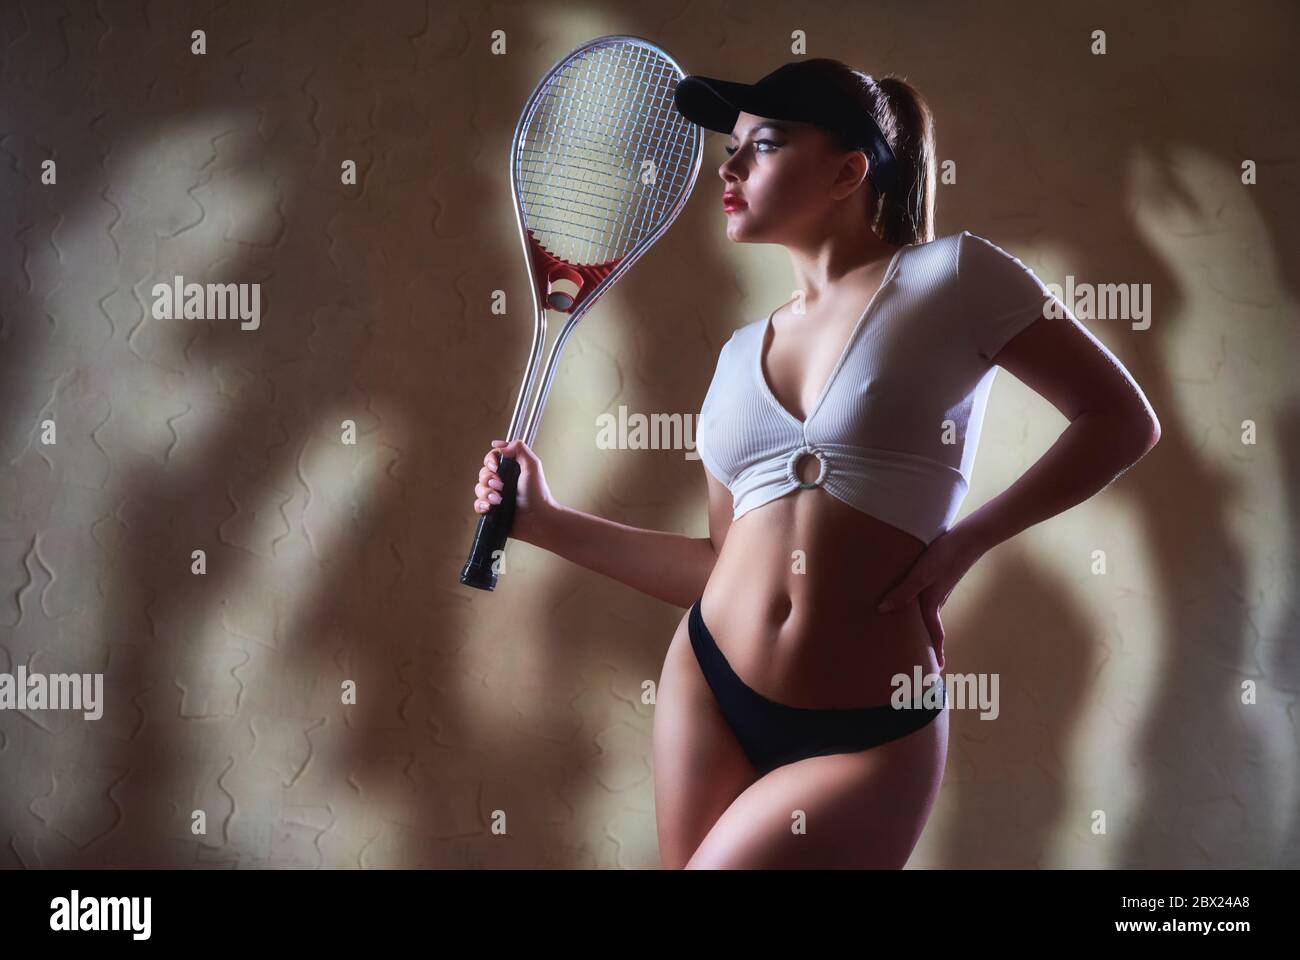 Young beautiful woman with tennis racquet in profile against a grunge wall with a striped shadow Stock Photo